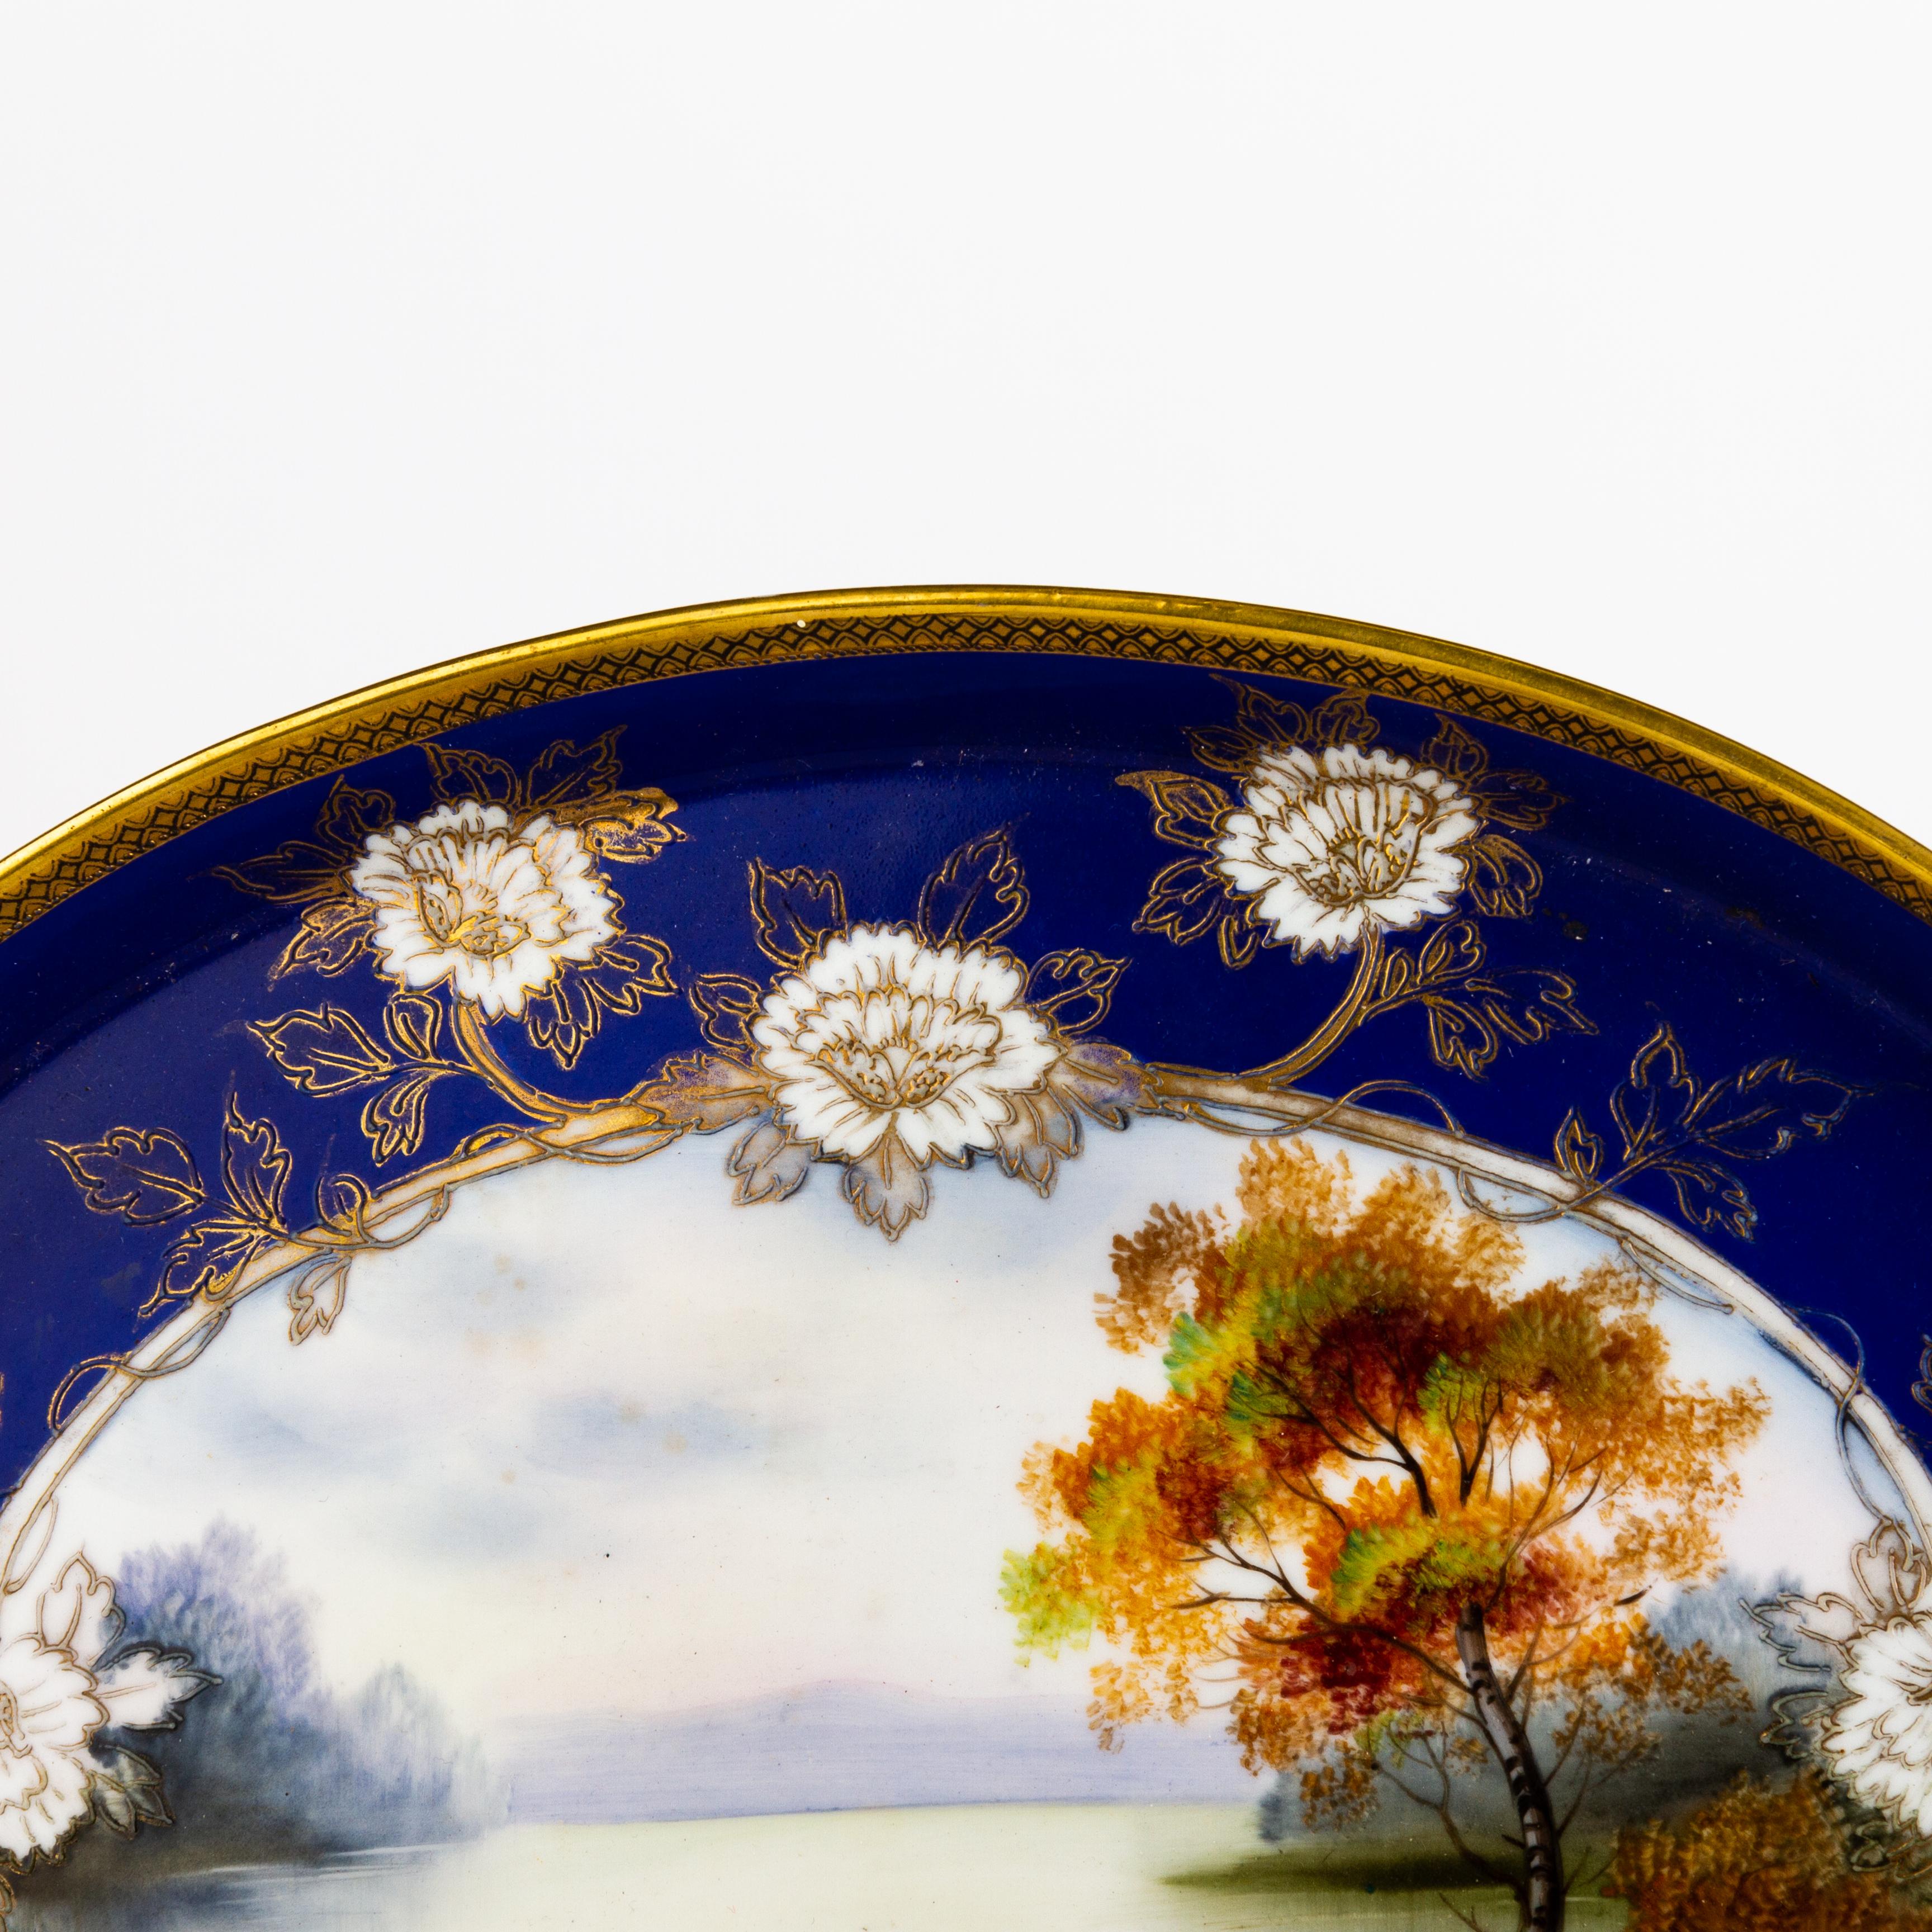 20th Century Noritake Japanese Art Deco Porcelain Oval Tray Plate For Sale